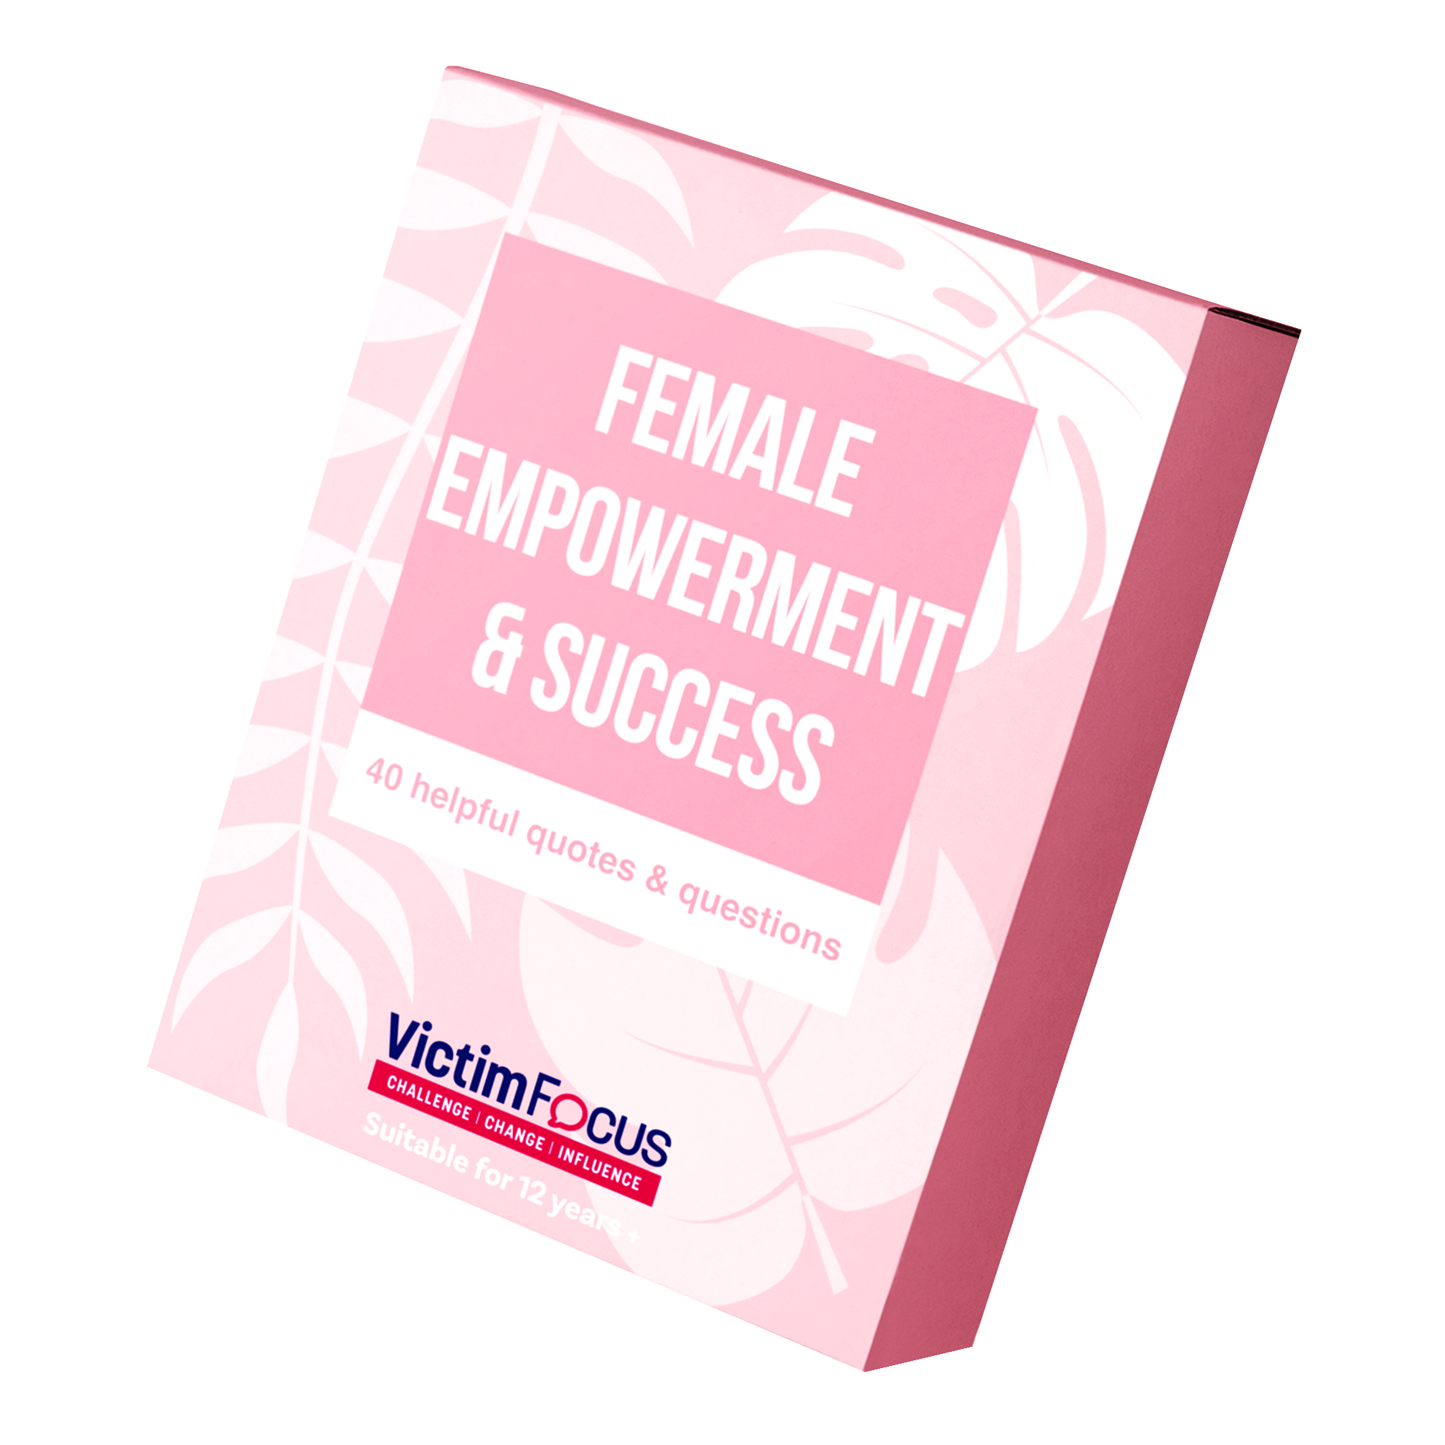 Female empowerment and success: 40 helpful quotes and questions